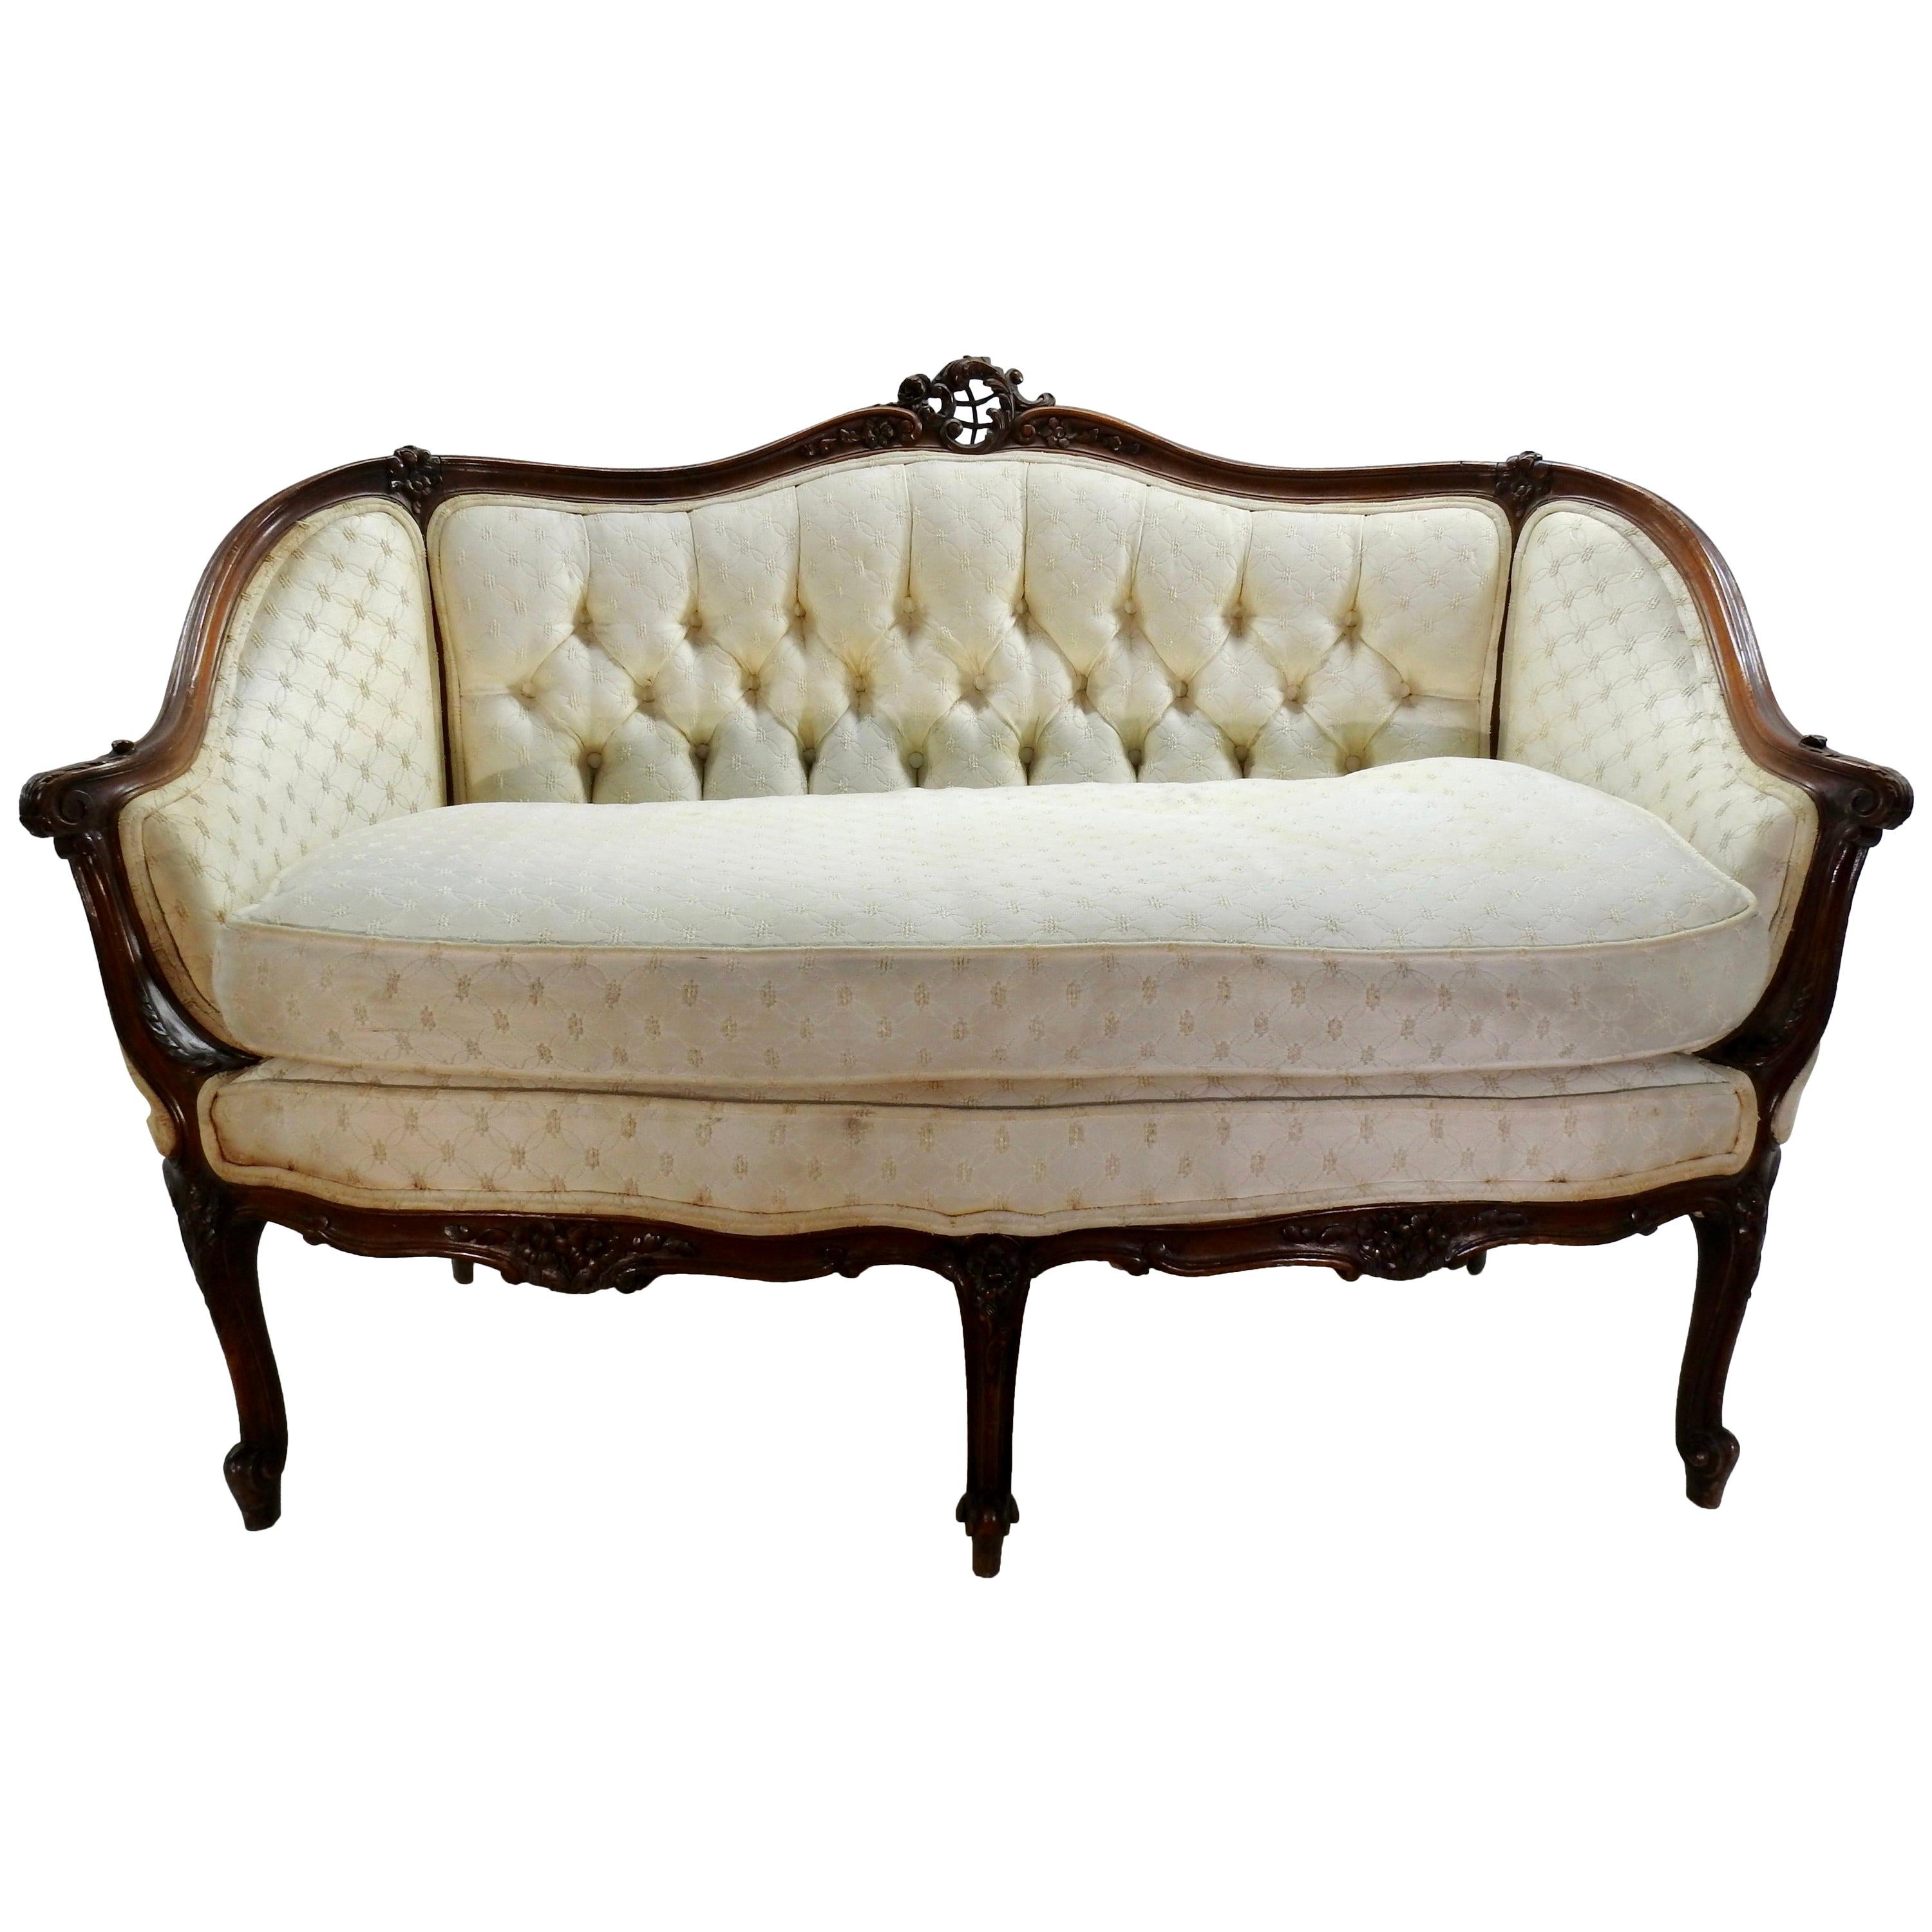 Victorian French Settee, 19th Century For Sale